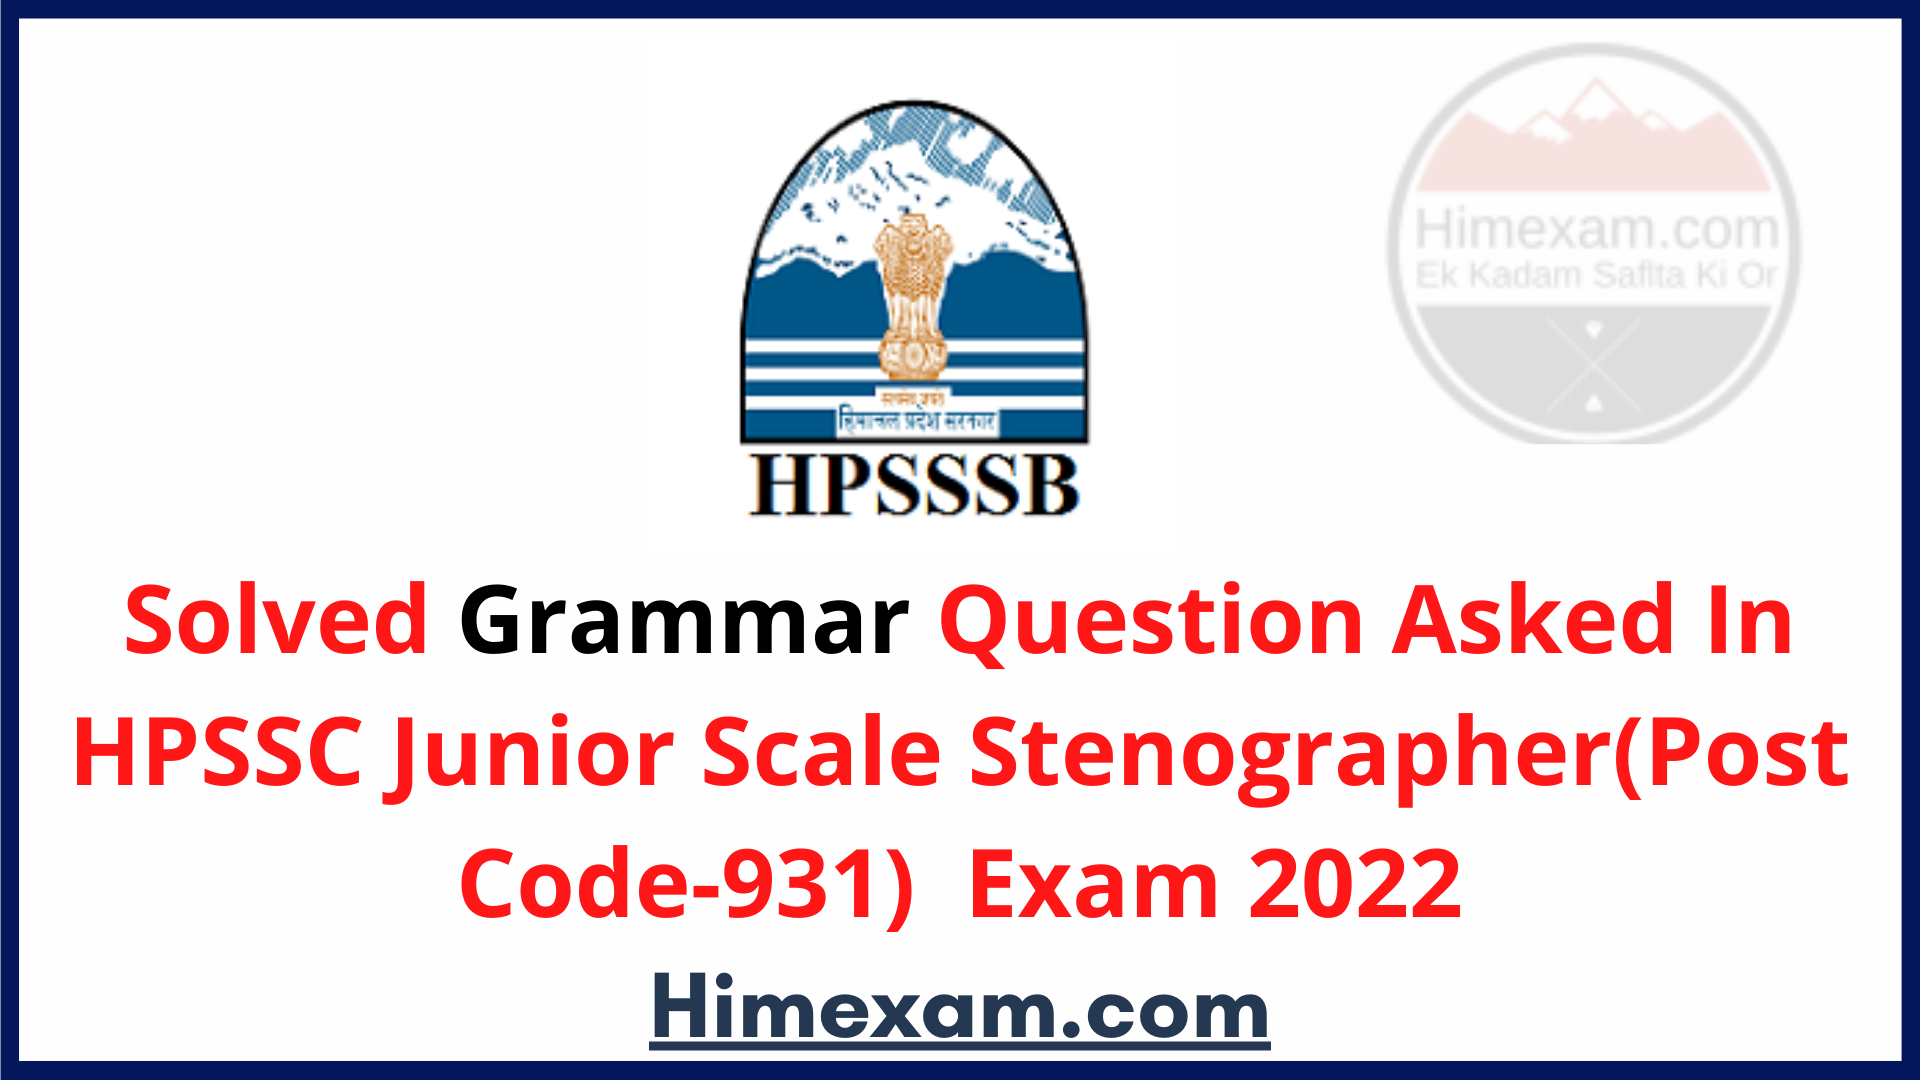 Solved Grammar Question Answer Asked In HPSSC Junior Scale Stenographer(Post Code-931)  Exam Question Paper Held On 09 April 2022